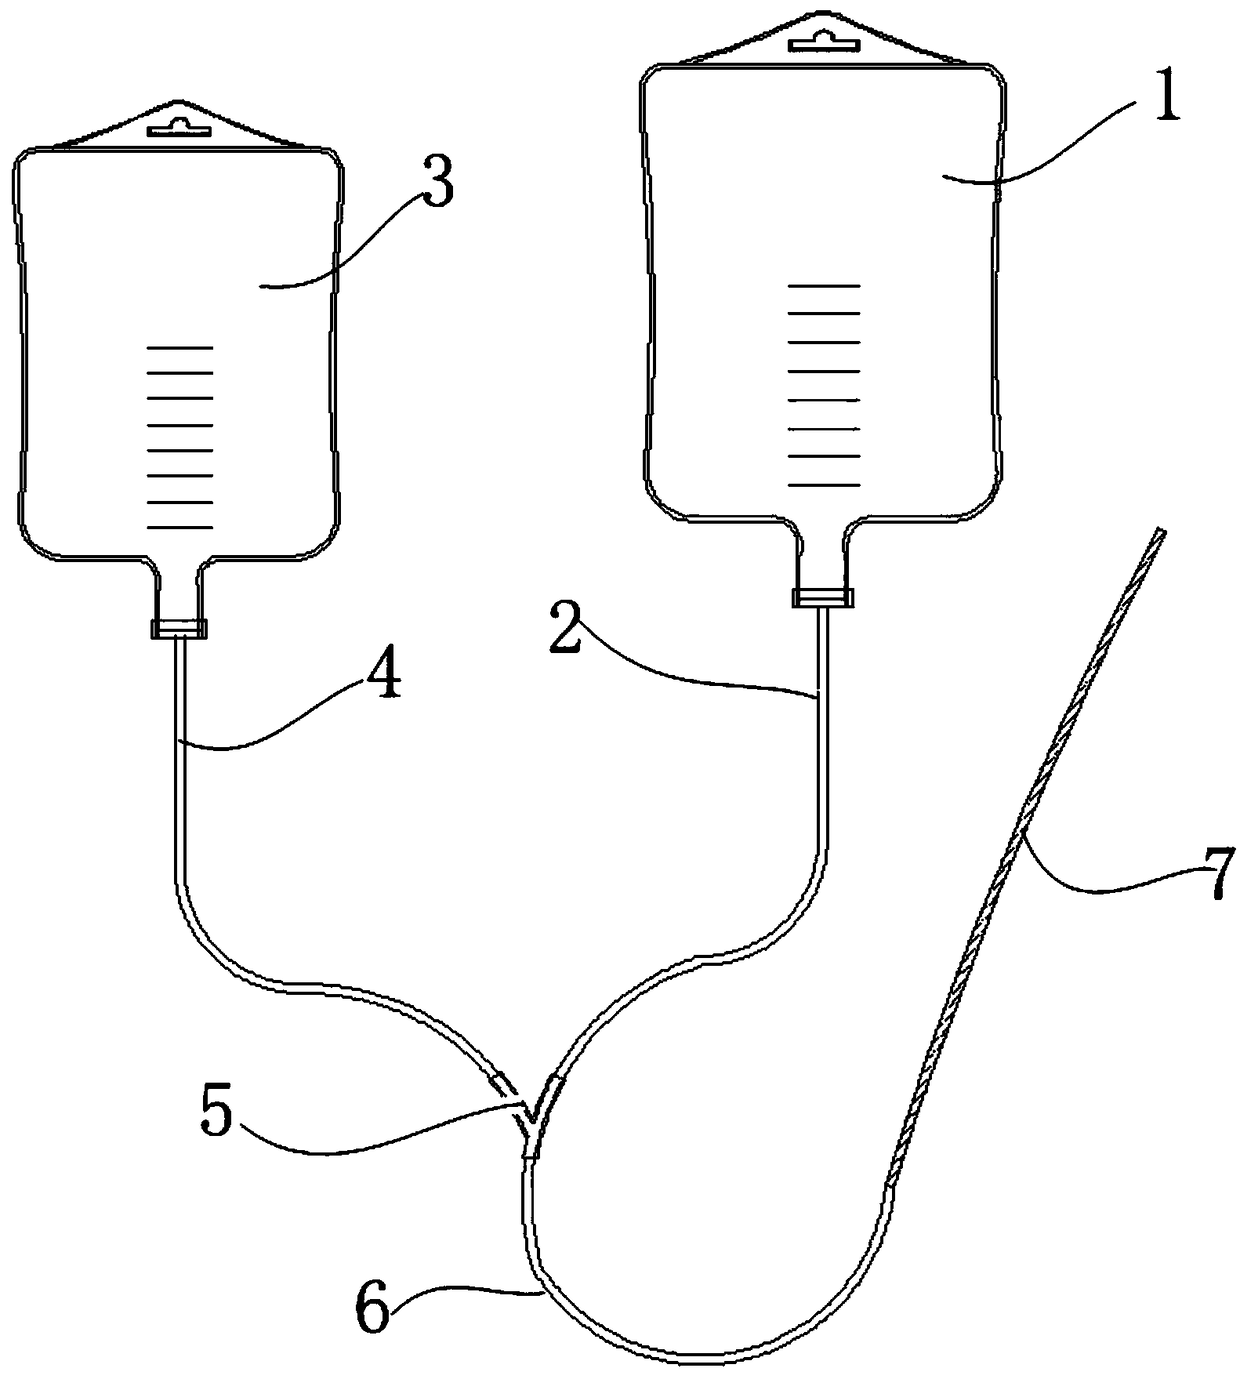 Peritoneal dialysis device for nephrology department